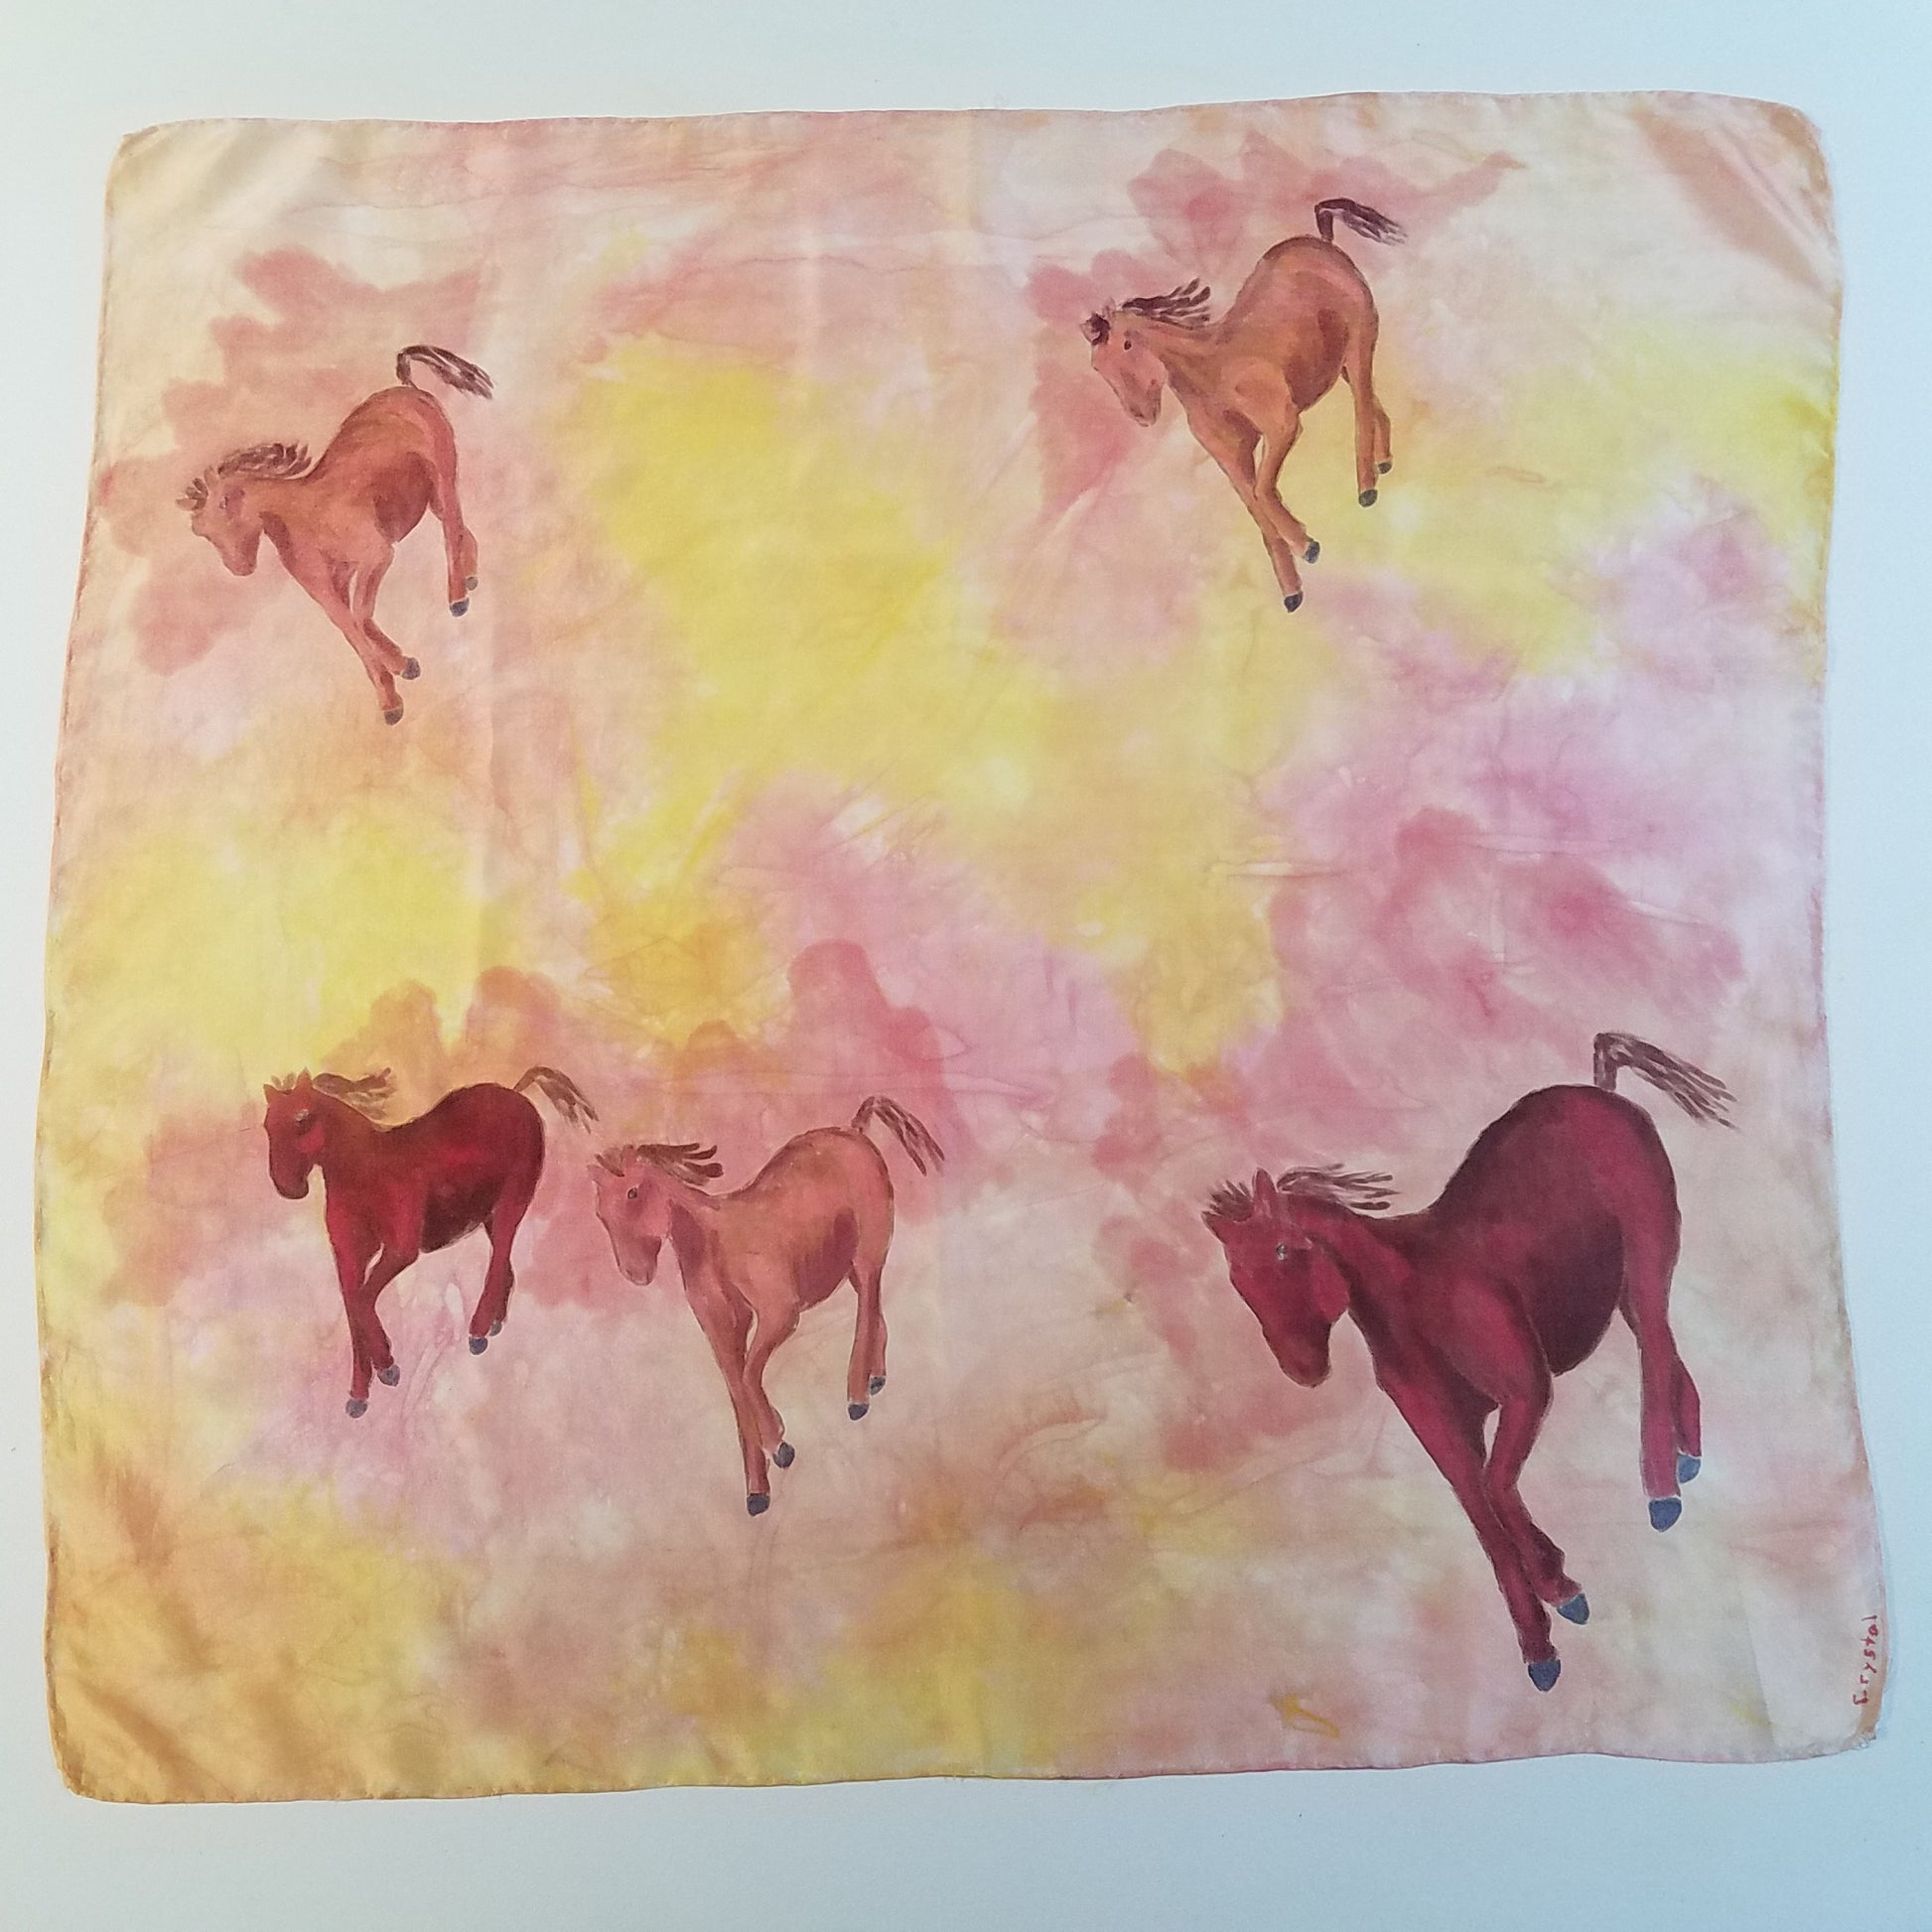 " Running Horses " Habotai Silk Shawl Artist: Crystal Lawrence 29" wide x 29" long silk shawl  Hand dyed and hand painted with running horses  Beautiful way to dress up any outfit